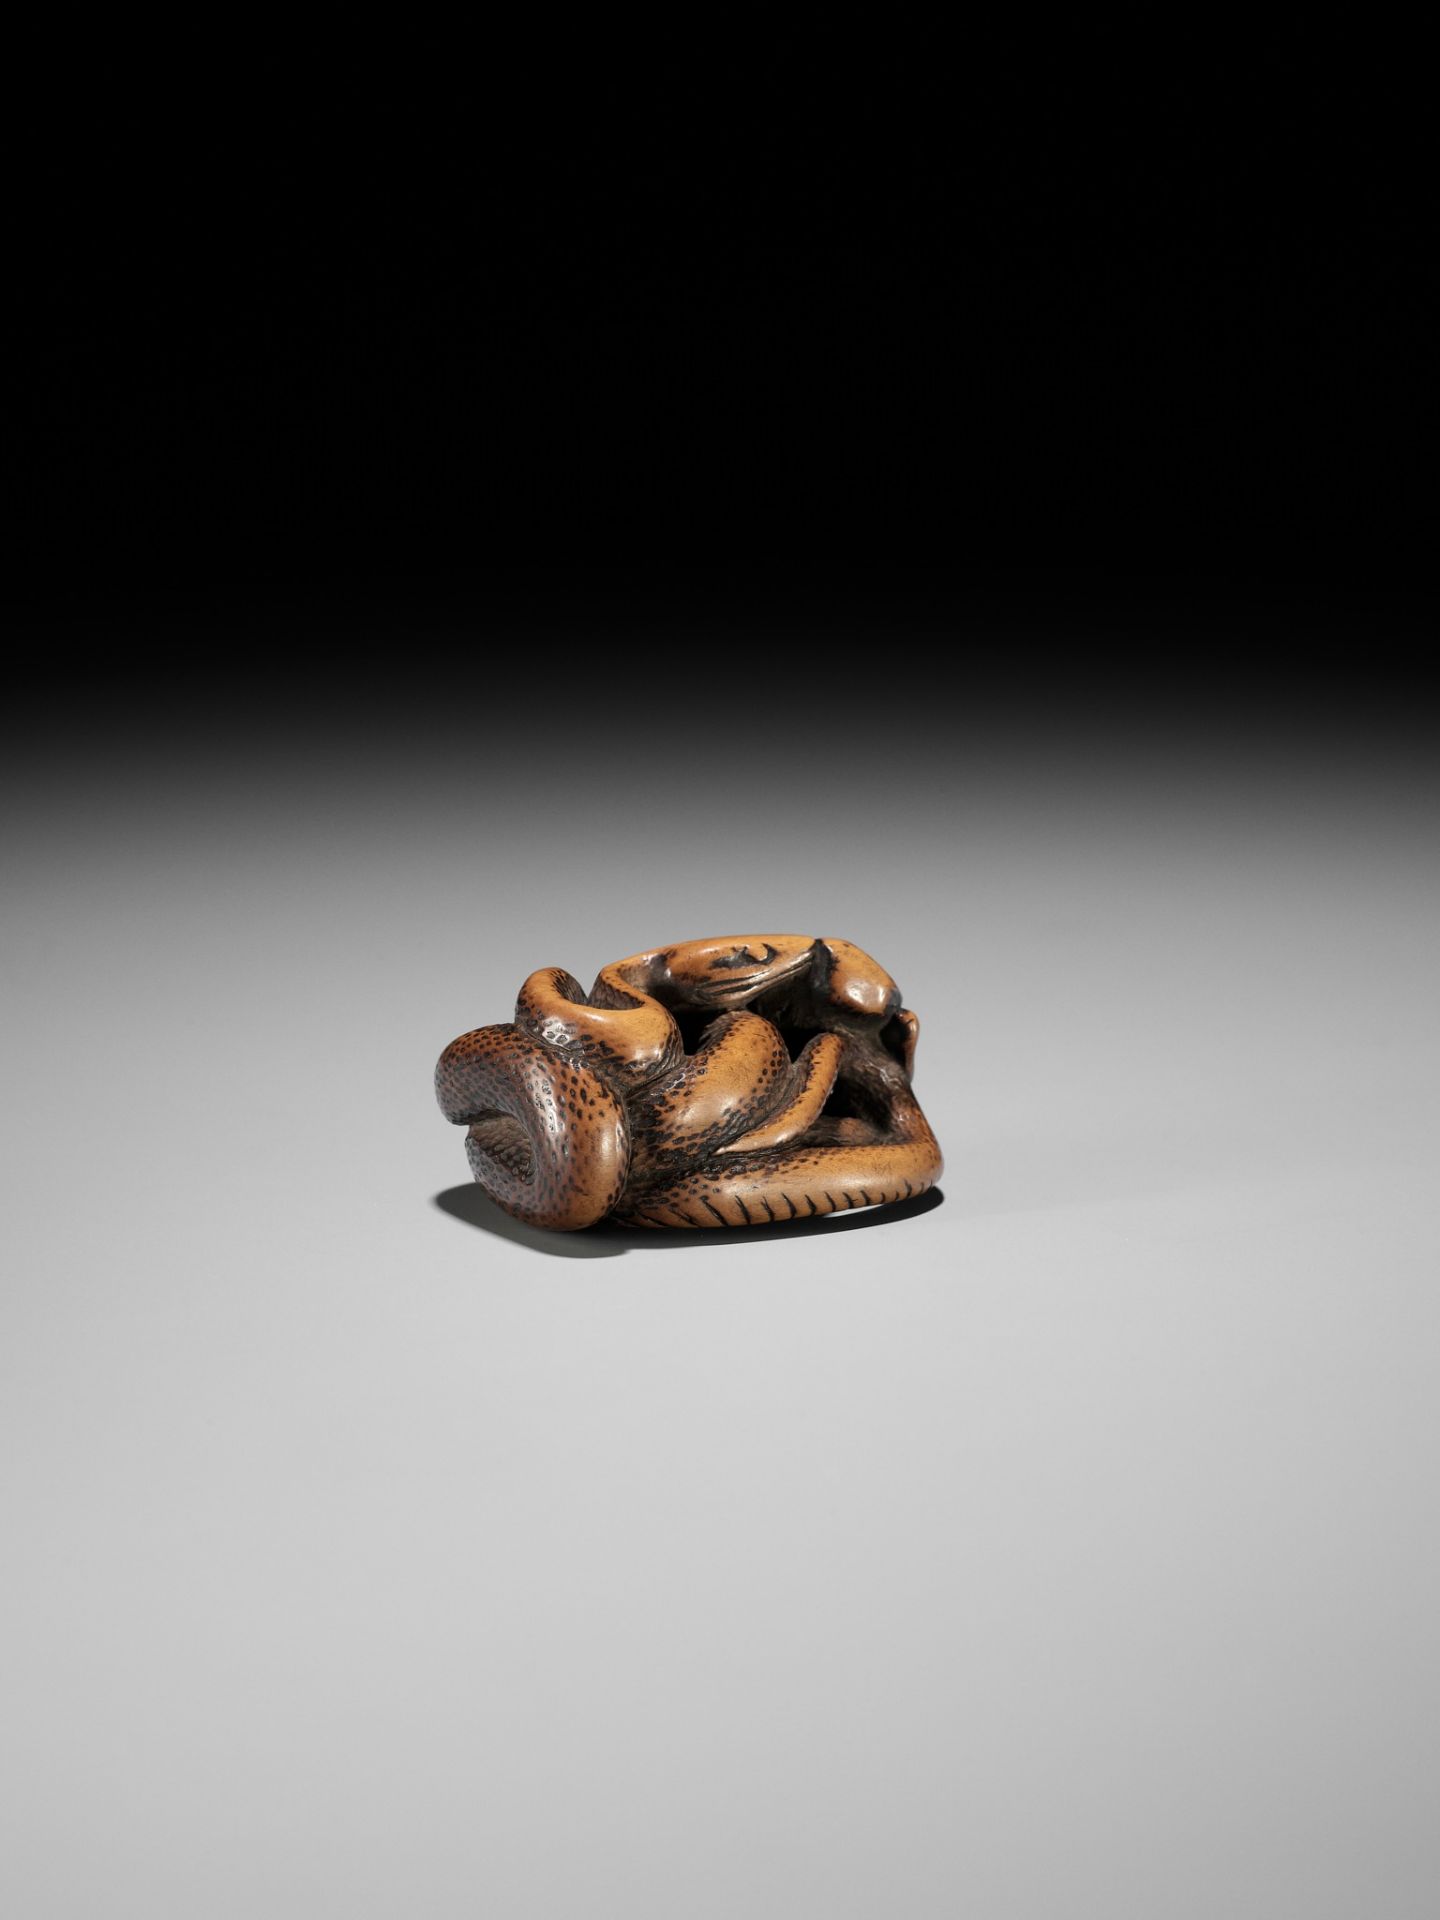 AN EARLY WOOD NETSUKE OF A SNAKE AND FROG - Image 9 of 12